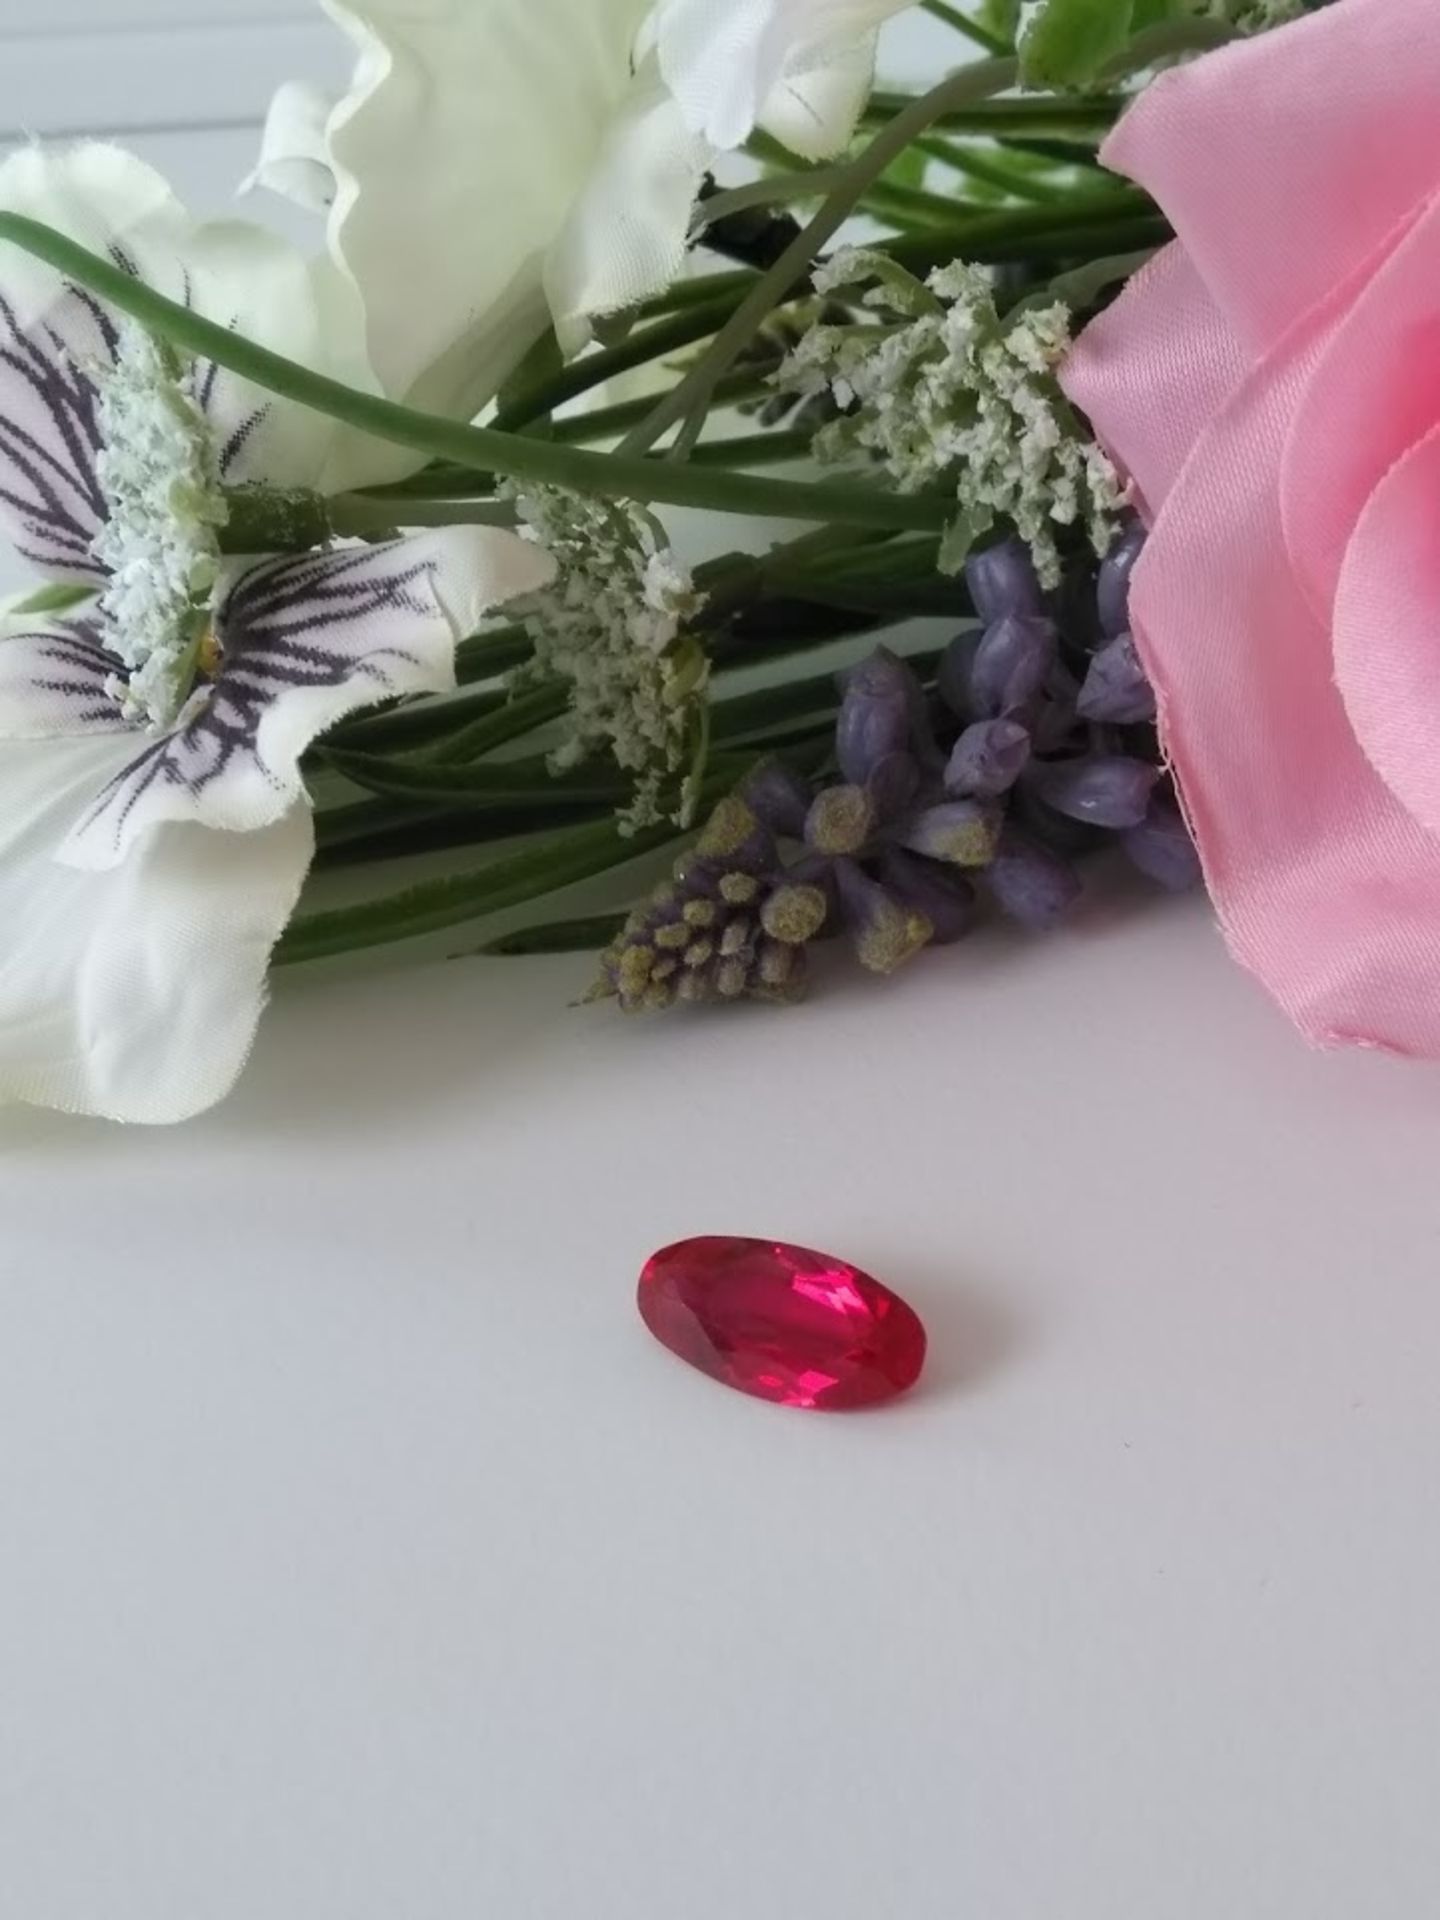 A Truly Stunning AGI Certified 5.64 Cts Ruby Investment Gemstone. - VS Clarity - Stunning Red Colour - Image 2 of 3